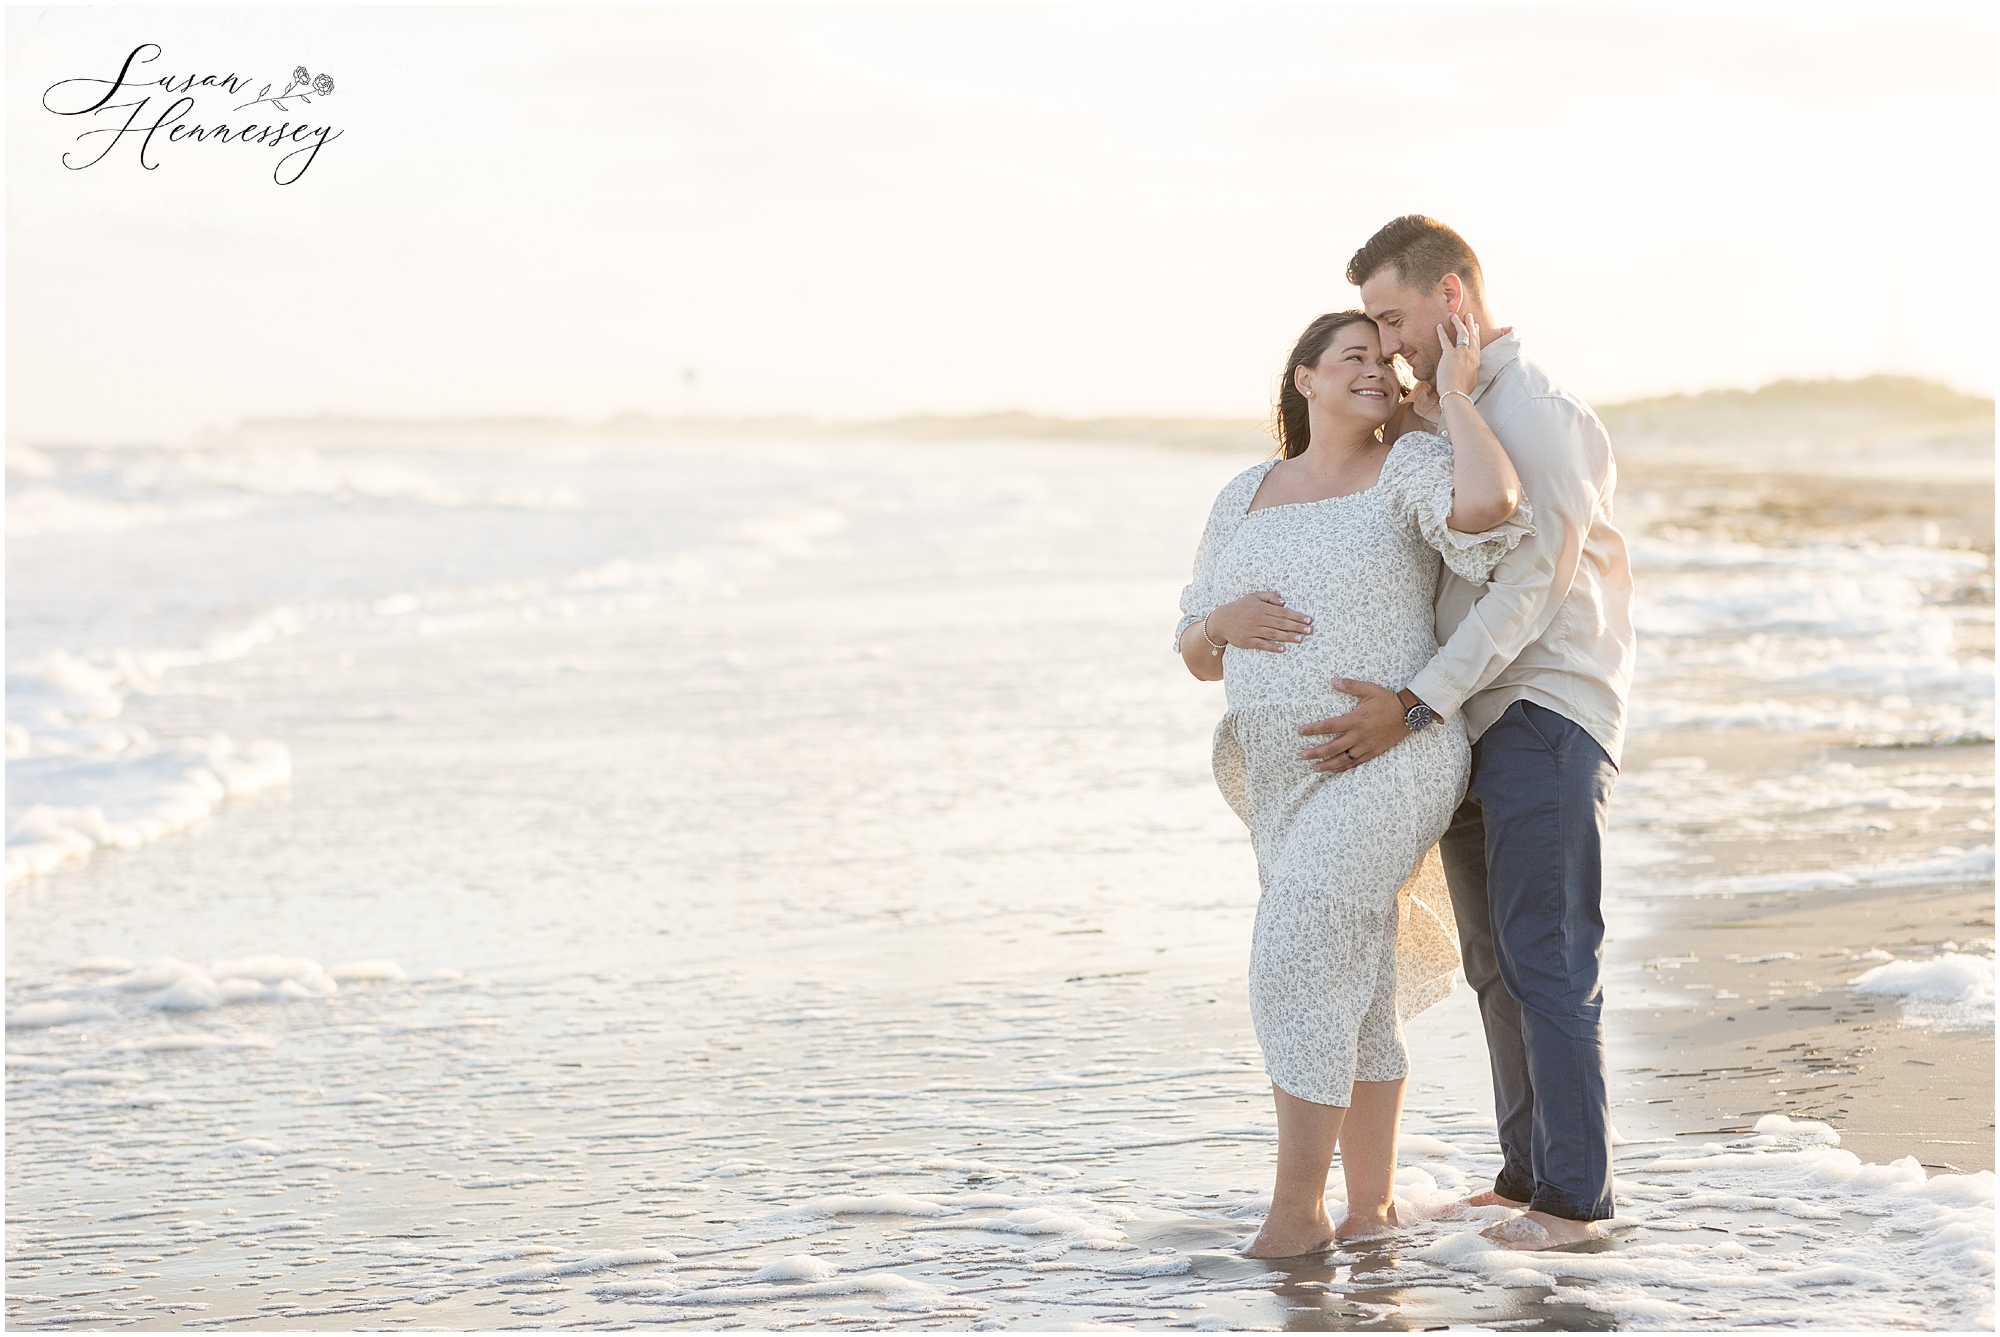 Beach Maternity Session photographed in Ocean City, NJ by Susan Hennessey Photography, South Jersey newborn photographer